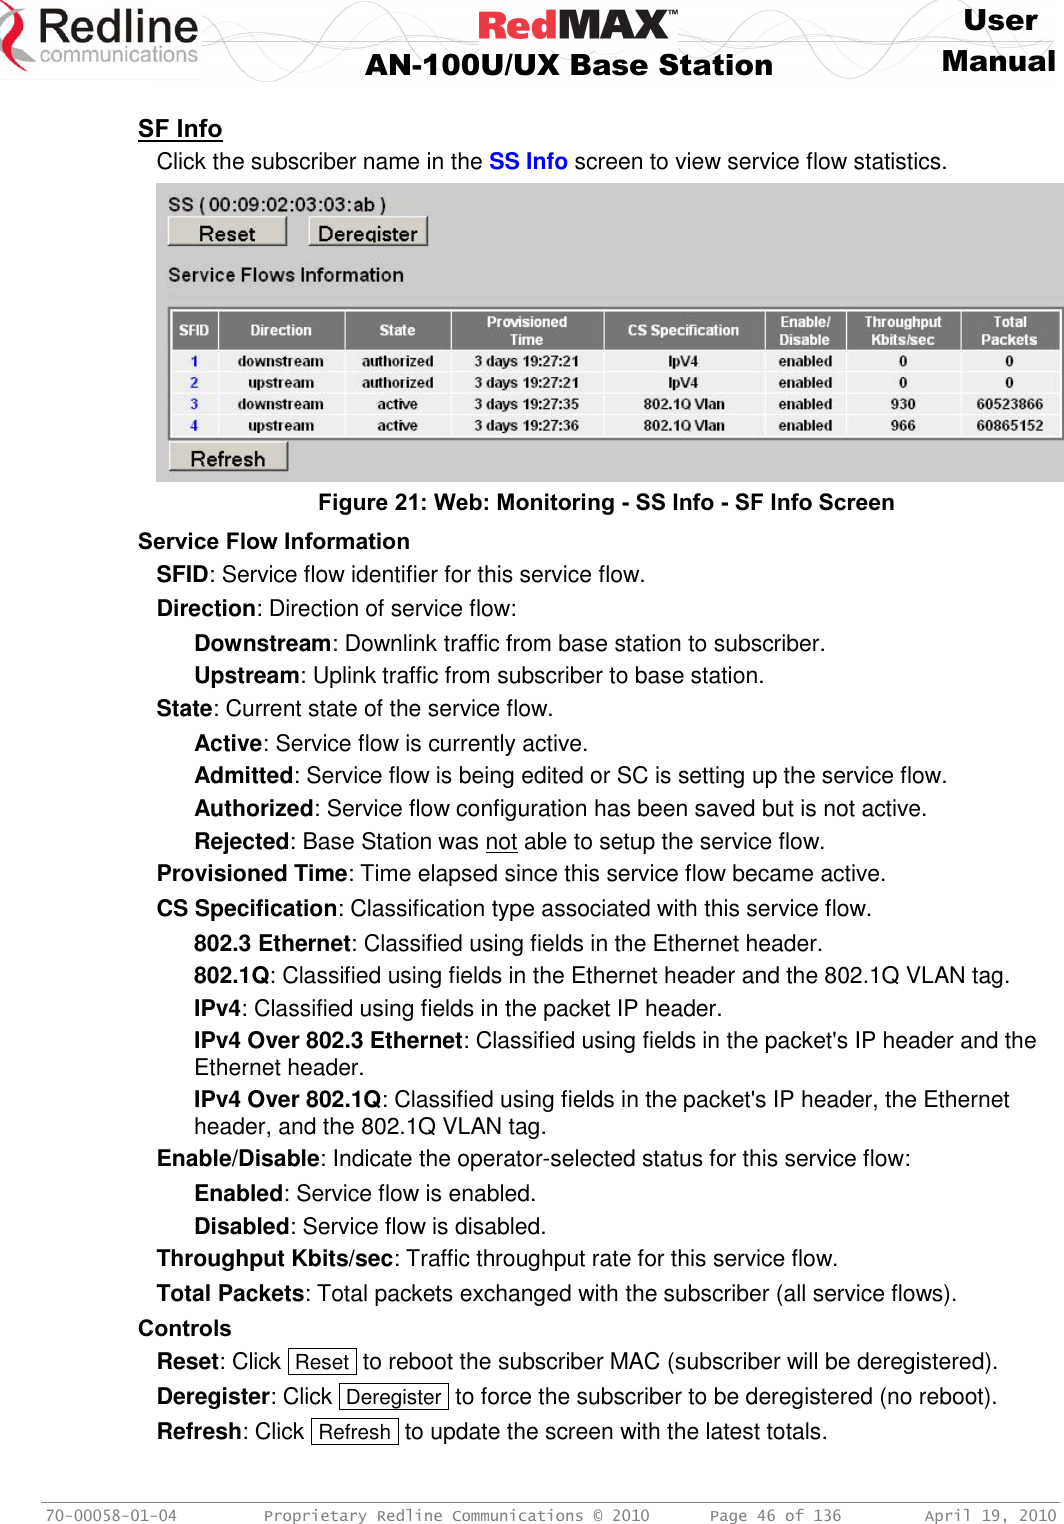     User  AN-100U/UX Base Station Manual   70-00058-01-04  Proprietary Redline Communications © 2010   Page 46 of 136  April 19, 2010  SF Info Click the subscriber name in the SS Info screen to view service flow statistics.  Figure 21: Web: Monitoring - SS Info - SF Info Screen Service Flow Information SFID: Service flow identifier for this service flow. Direction: Direction of service flow: Downstream: Downlink traffic from base station to subscriber. Upstream: Uplink traffic from subscriber to base station. State: Current state of the service flow. Active: Service flow is currently active. Admitted: Service flow is being edited or SC is setting up the service flow. Authorized: Service flow configuration has been saved but is not active. Rejected: Base Station was not able to setup the service flow. Provisioned Time: Time elapsed since this service flow became active. CS Specification: Classification type associated with this service flow. 802.3 Ethernet: Classified using fields in the Ethernet header. 802.1Q: Classified using fields in the Ethernet header and the 802.1Q VLAN tag. IPv4: Classified using fields in the packet IP header. IPv4 Over 802.3 Ethernet: Classified using fields in the packet&apos;s IP header and the Ethernet header. IPv4 Over 802.1Q: Classified using fields in the packet&apos;s IP header, the Ethernet header, and the 802.1Q VLAN tag. Enable/Disable: Indicate the operator-selected status for this service flow: Enabled: Service flow is enabled. Disabled: Service flow is disabled. Throughput Kbits/sec: Traffic throughput rate for this service flow. Total Packets: Total packets exchanged with the subscriber (all service flows). Controls Reset: Click  Reset  to reboot the subscriber MAC (subscriber will be deregistered). Deregister: Click  Deregister  to force the subscriber to be deregistered (no reboot). Refresh: Click  Refresh  to update the screen with the latest totals. 